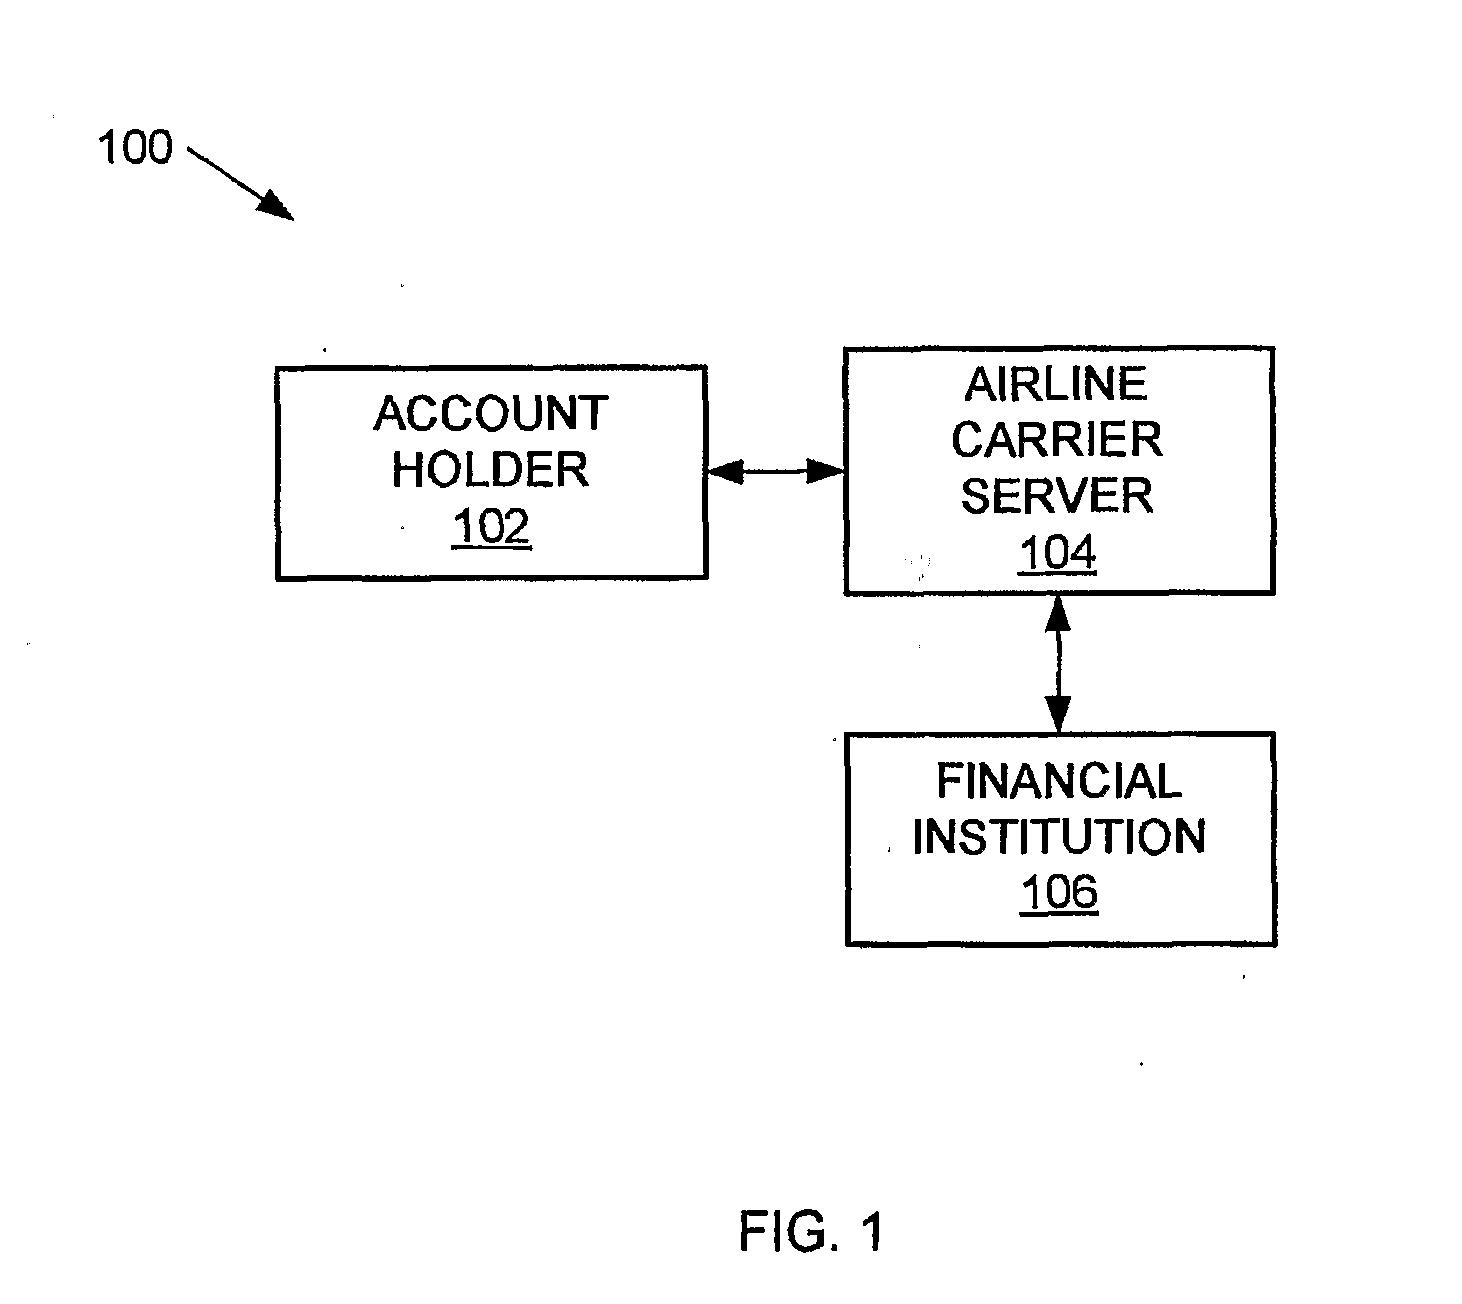 System and Method Using Enhanced Authorization Data to Reduce Travel-Related